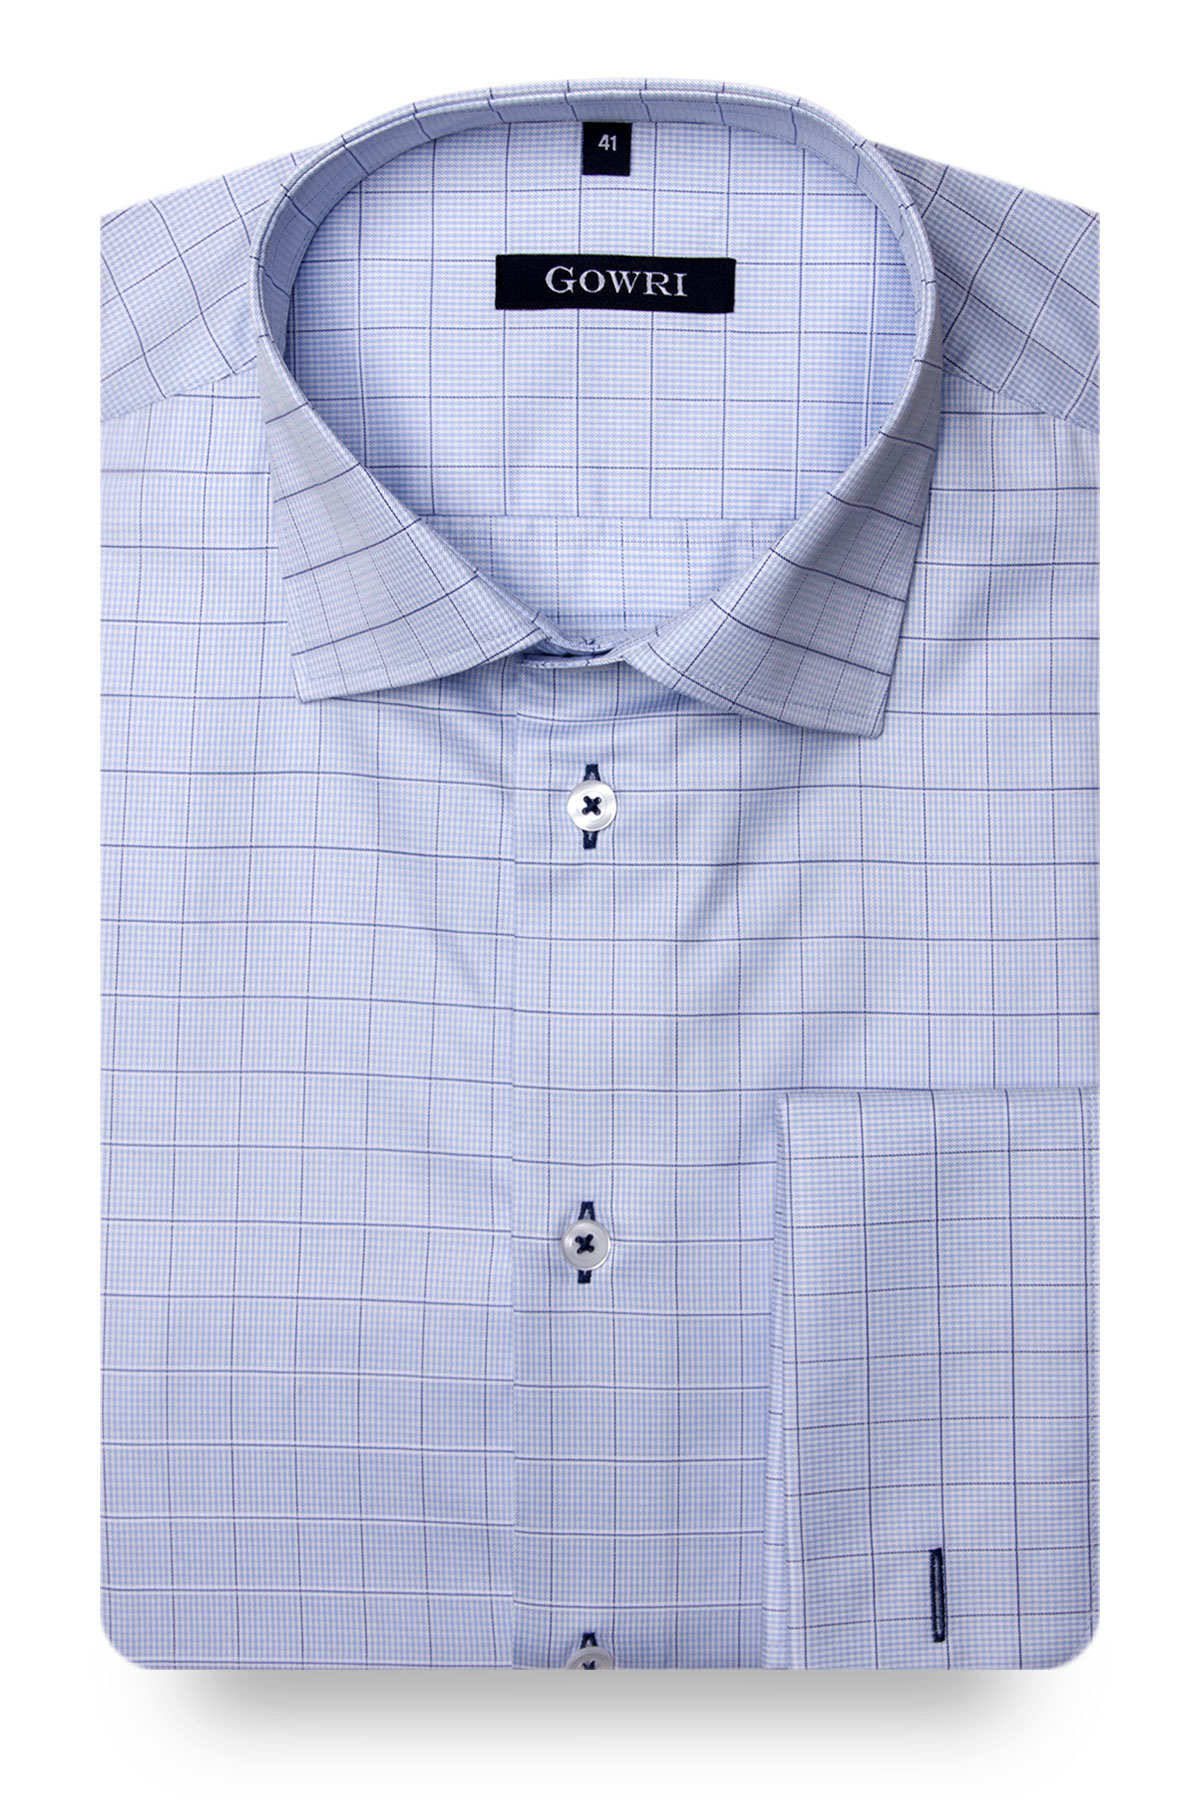 Duca Light Blue Checked Shirt – Gowri Style House